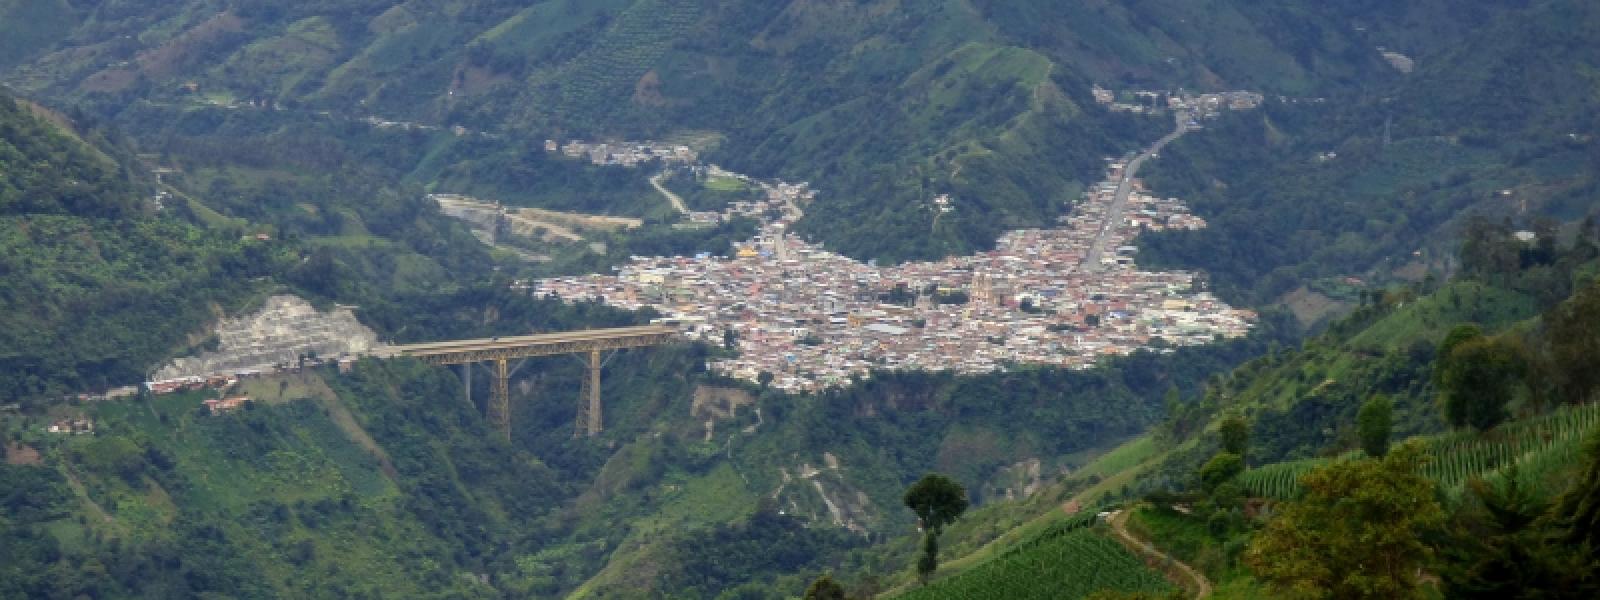 The small town of Cajamarca, Colombia